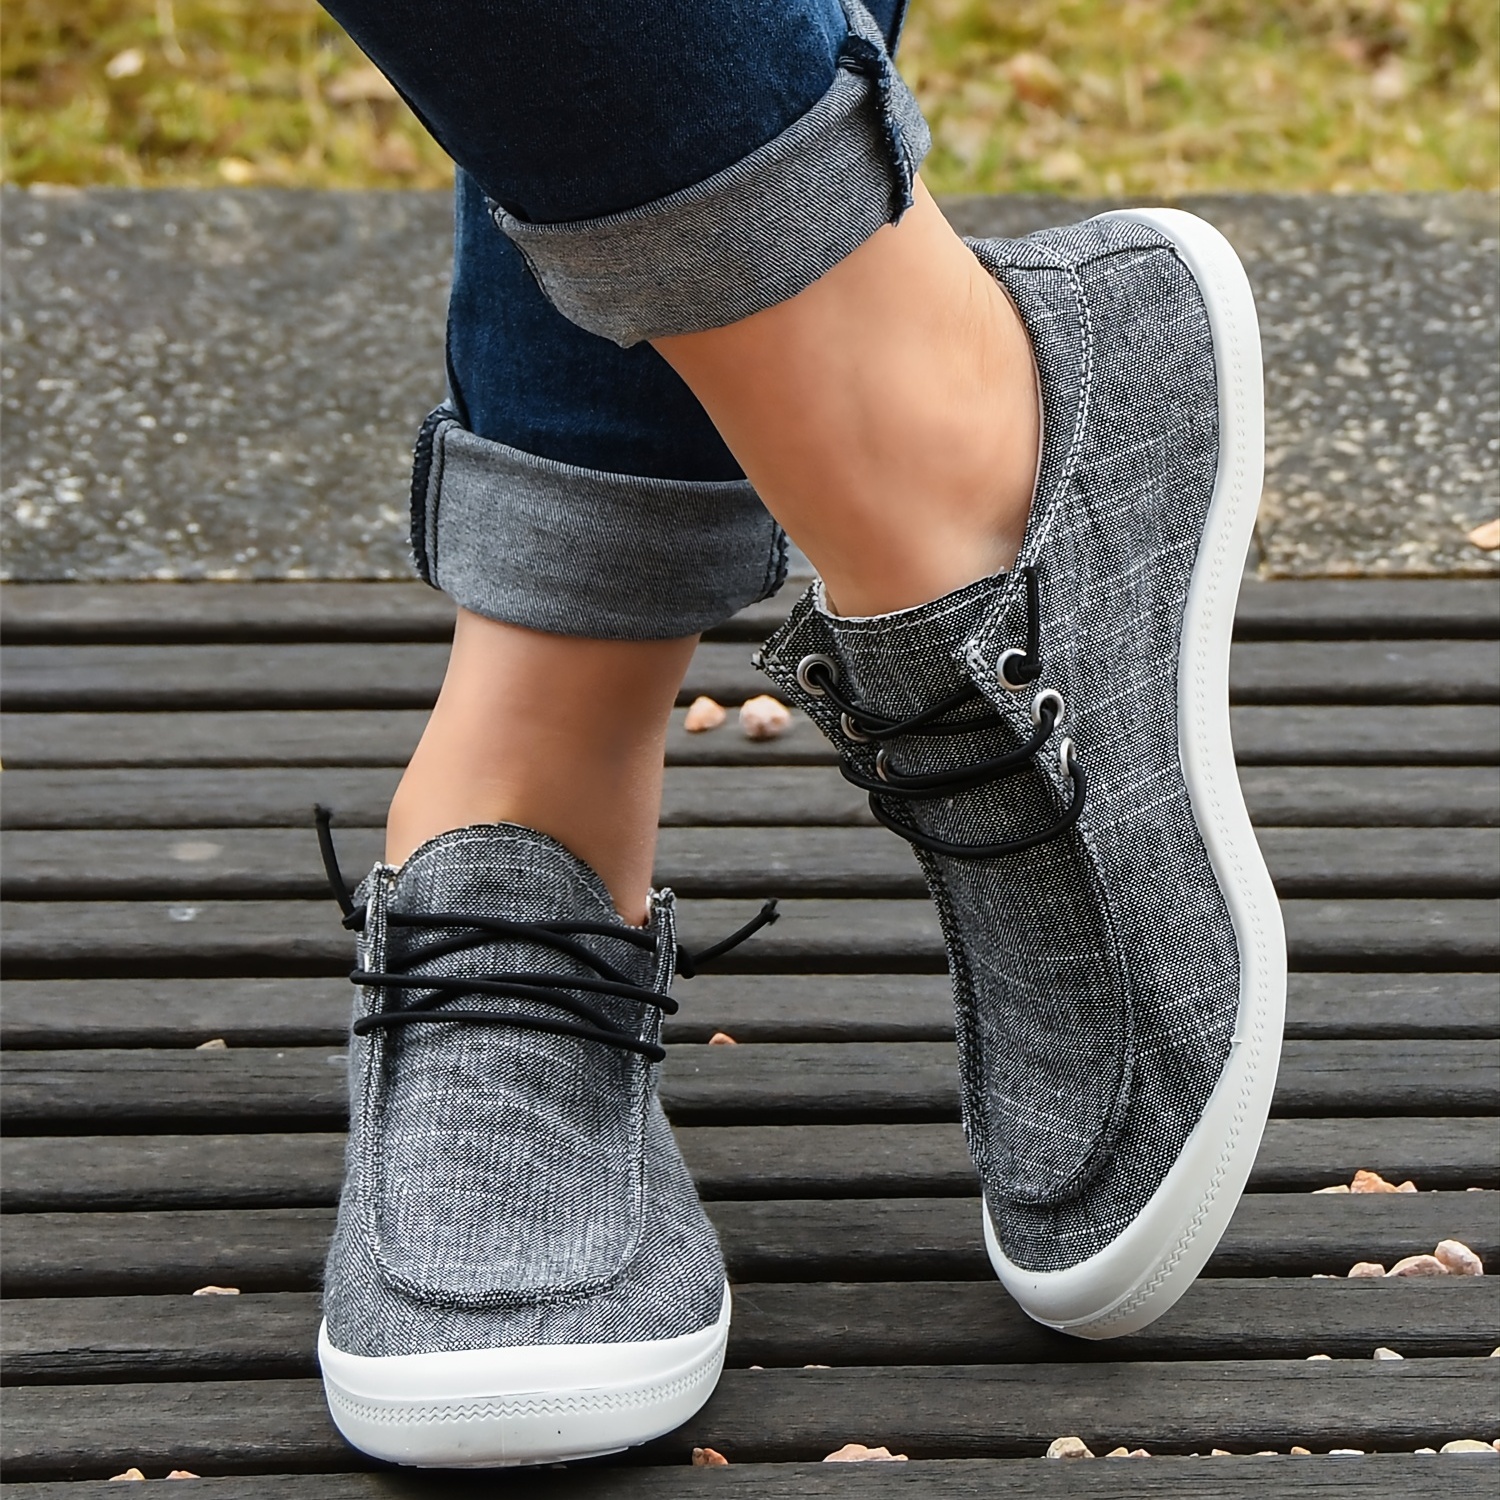 Women's Trainers, Canvas, Slip On & Skater Trainers